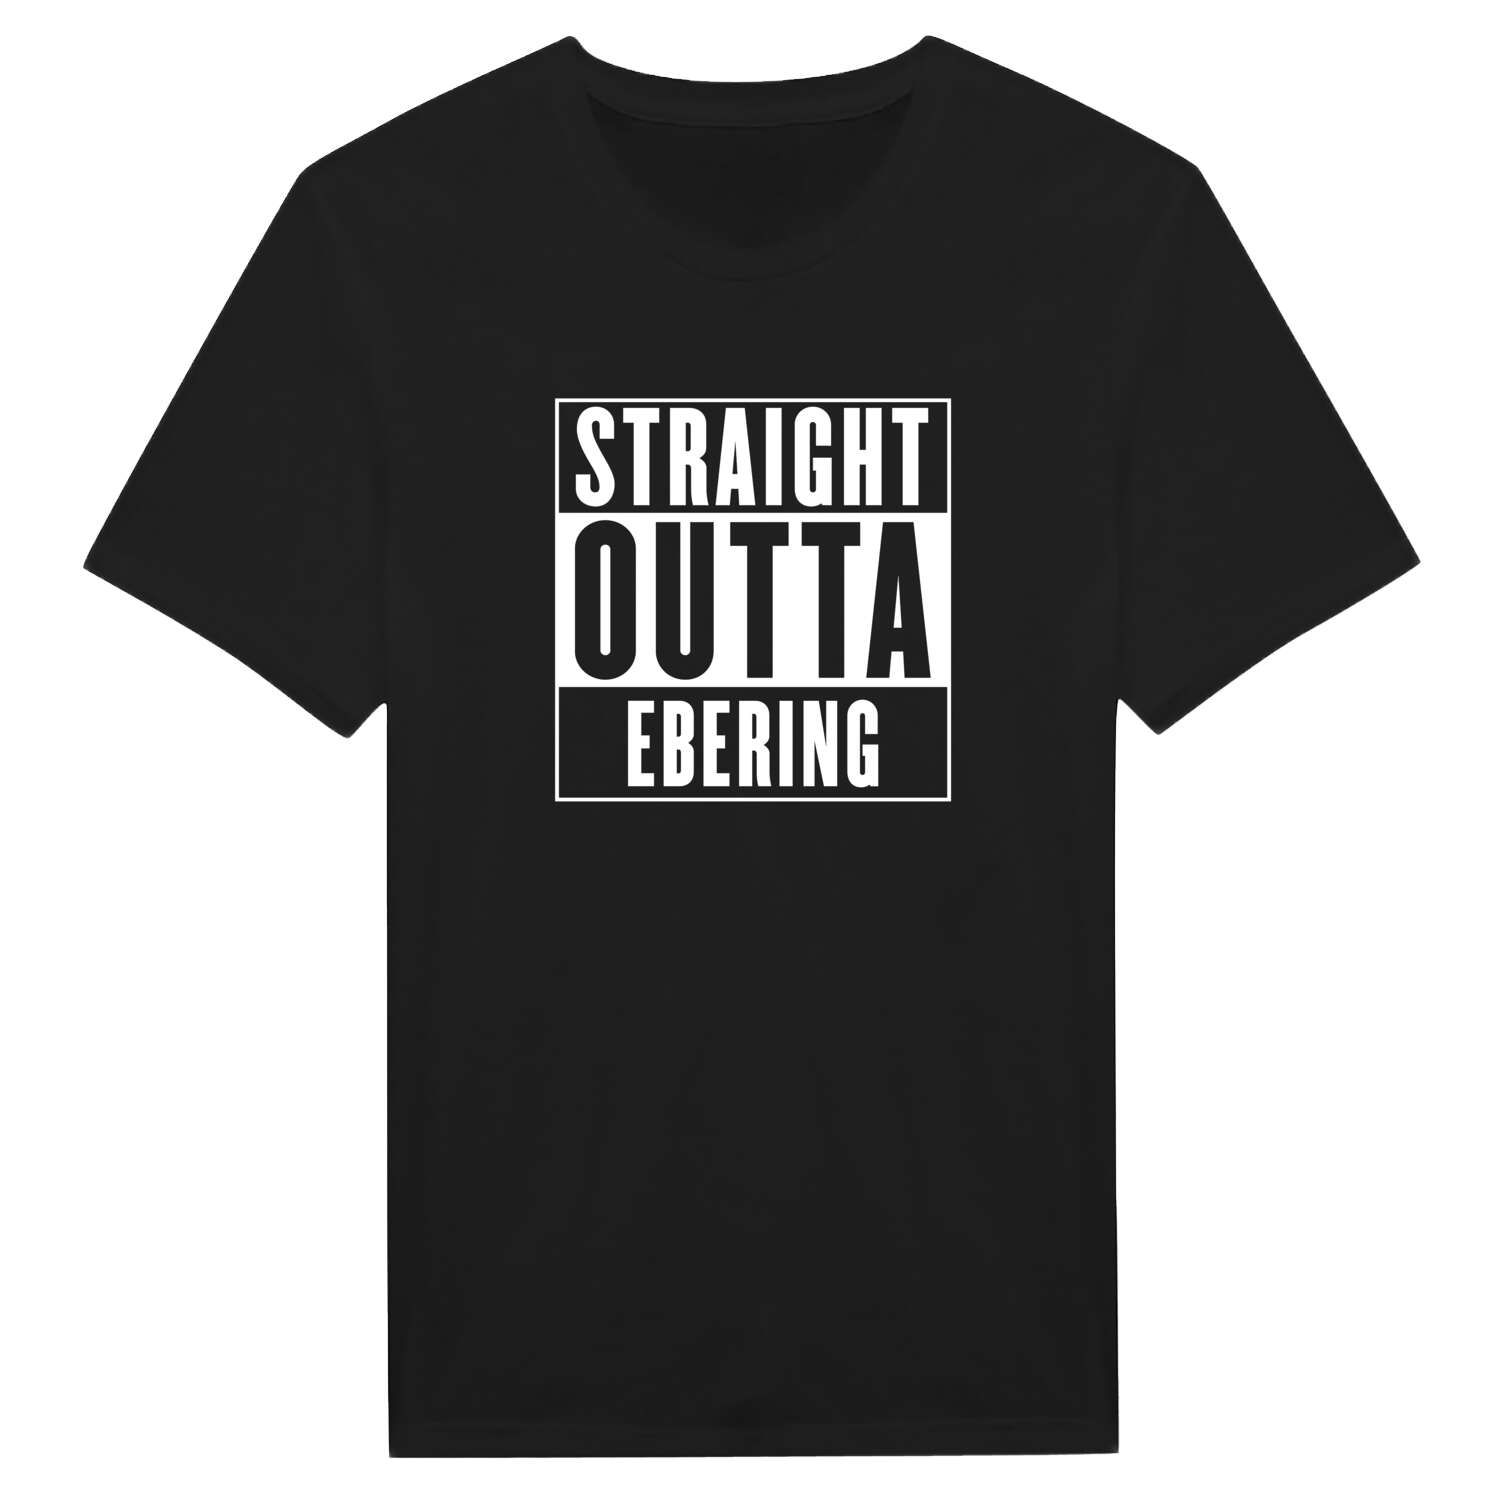 Ebering T-Shirt »Straight Outta«